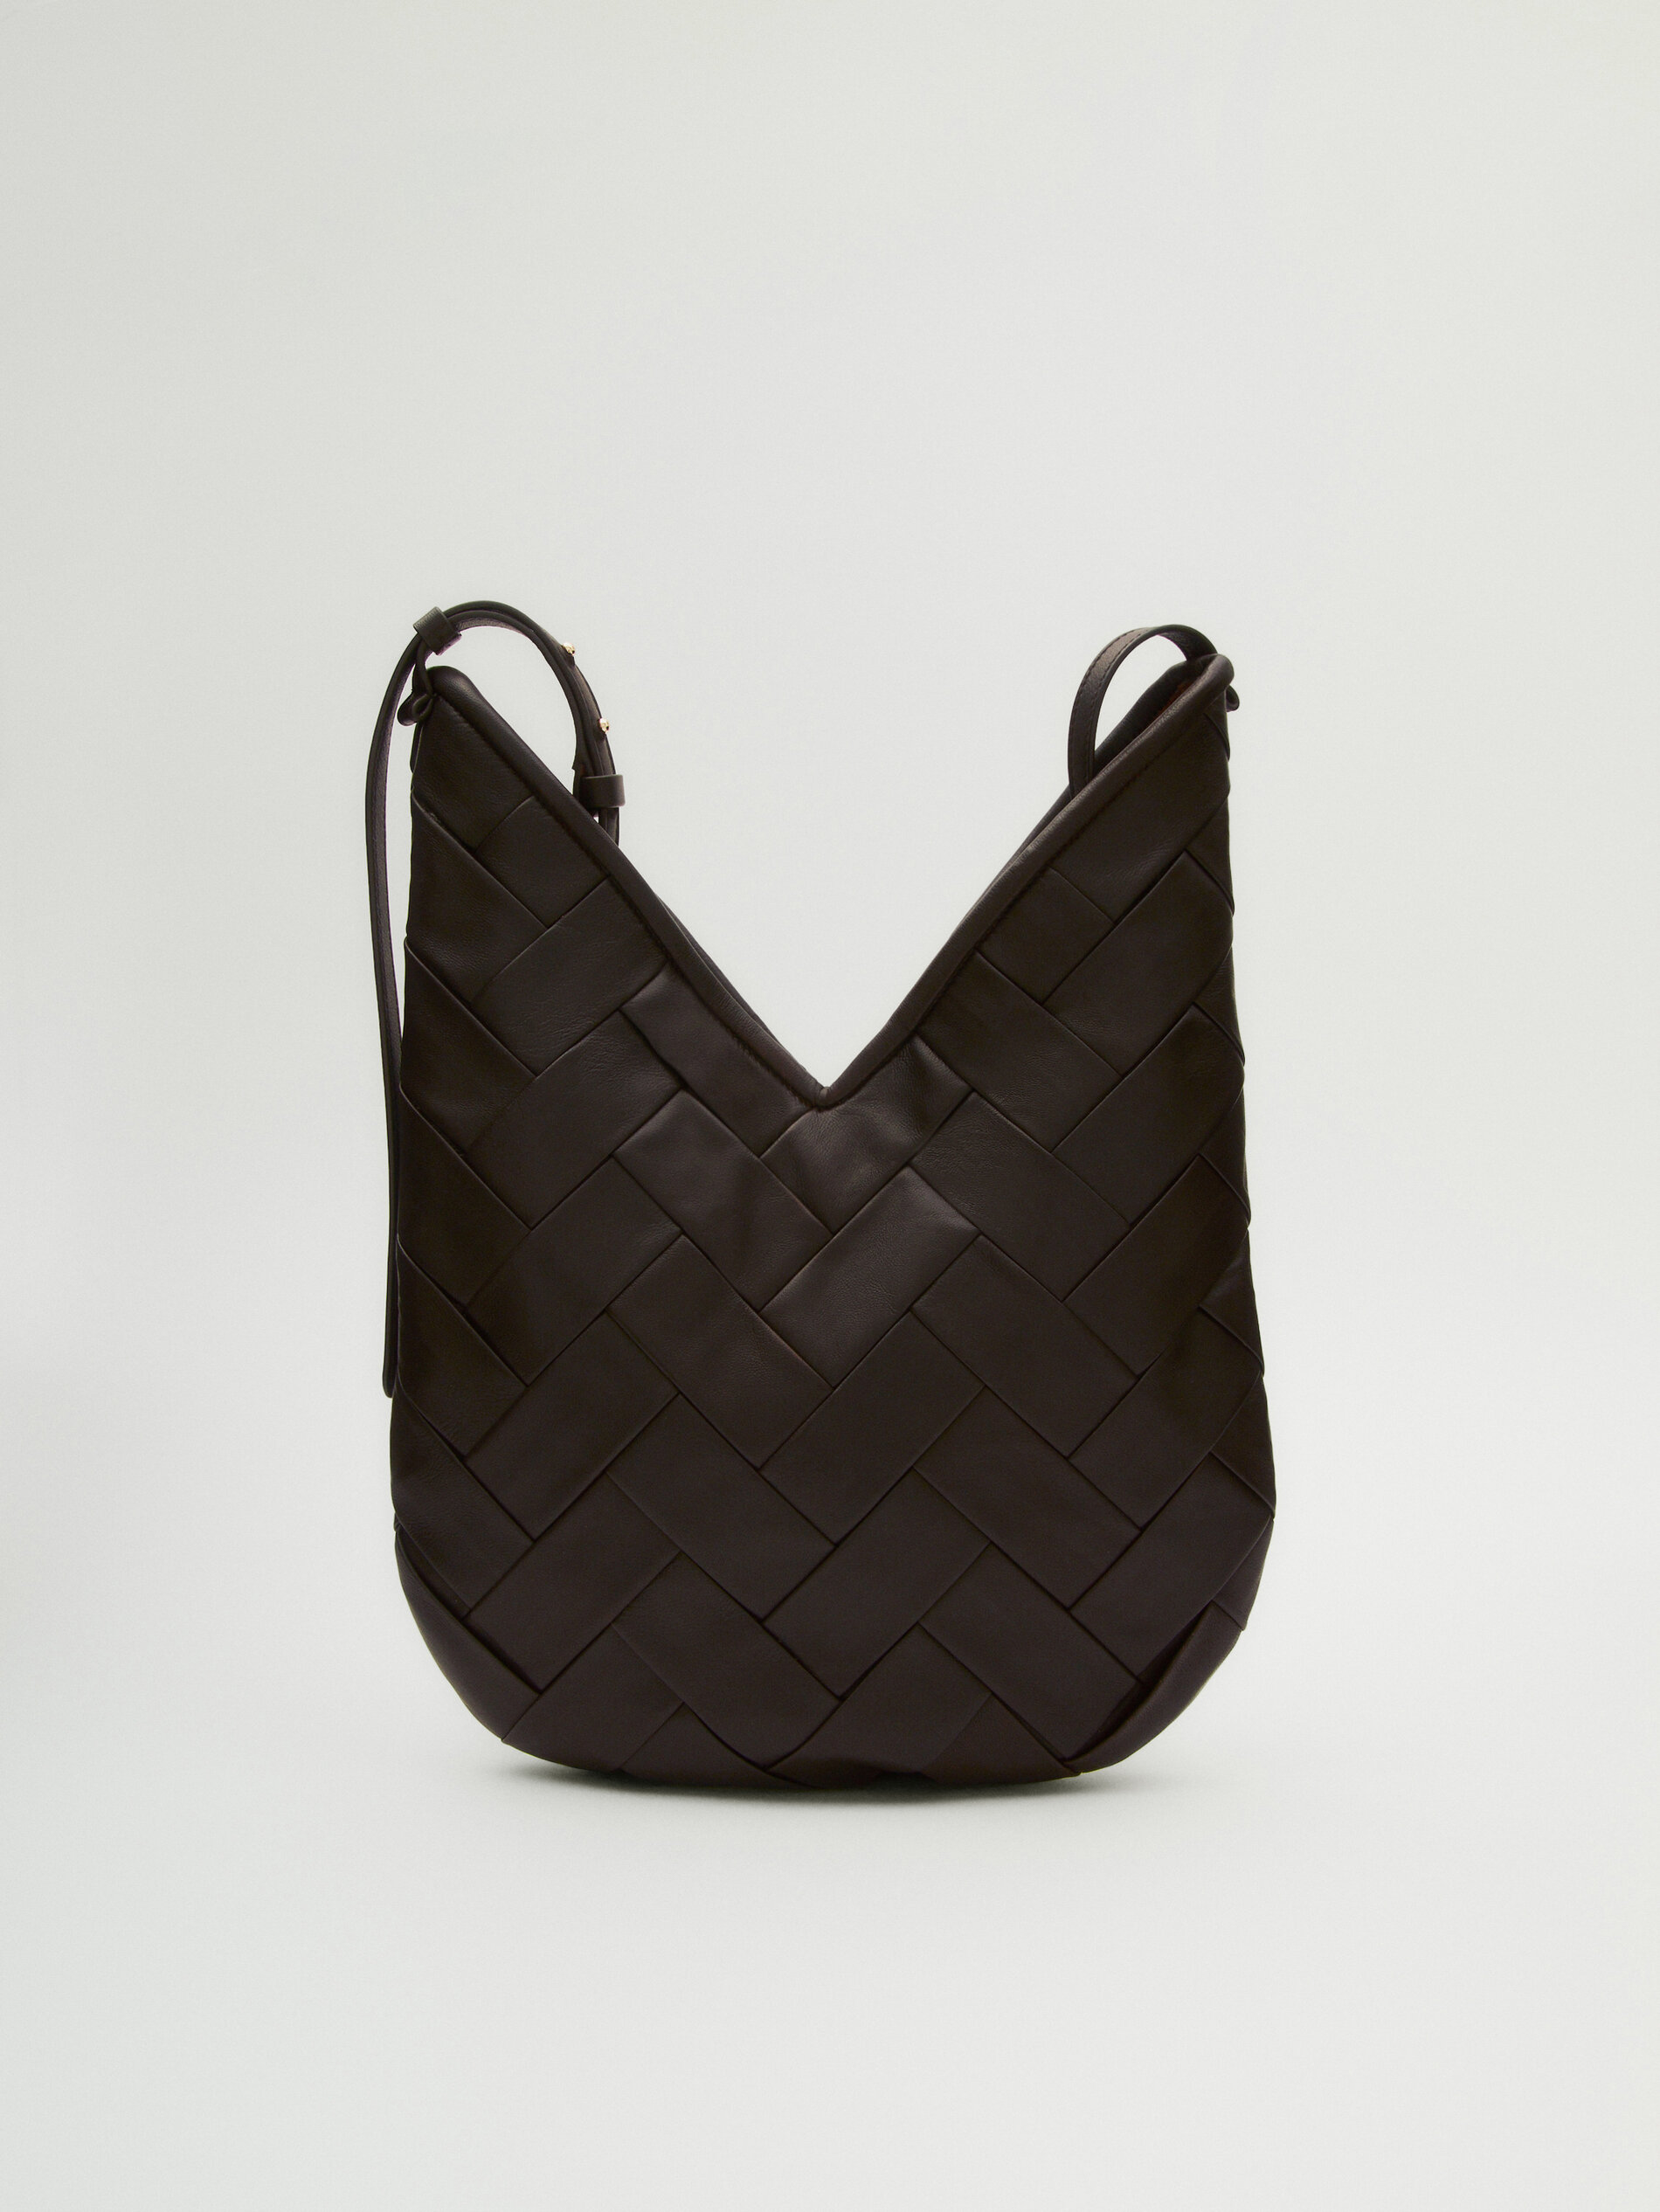 Massimo Dutti + Woven Nappa Leather-based mostly V-Formed Crossbody Glean